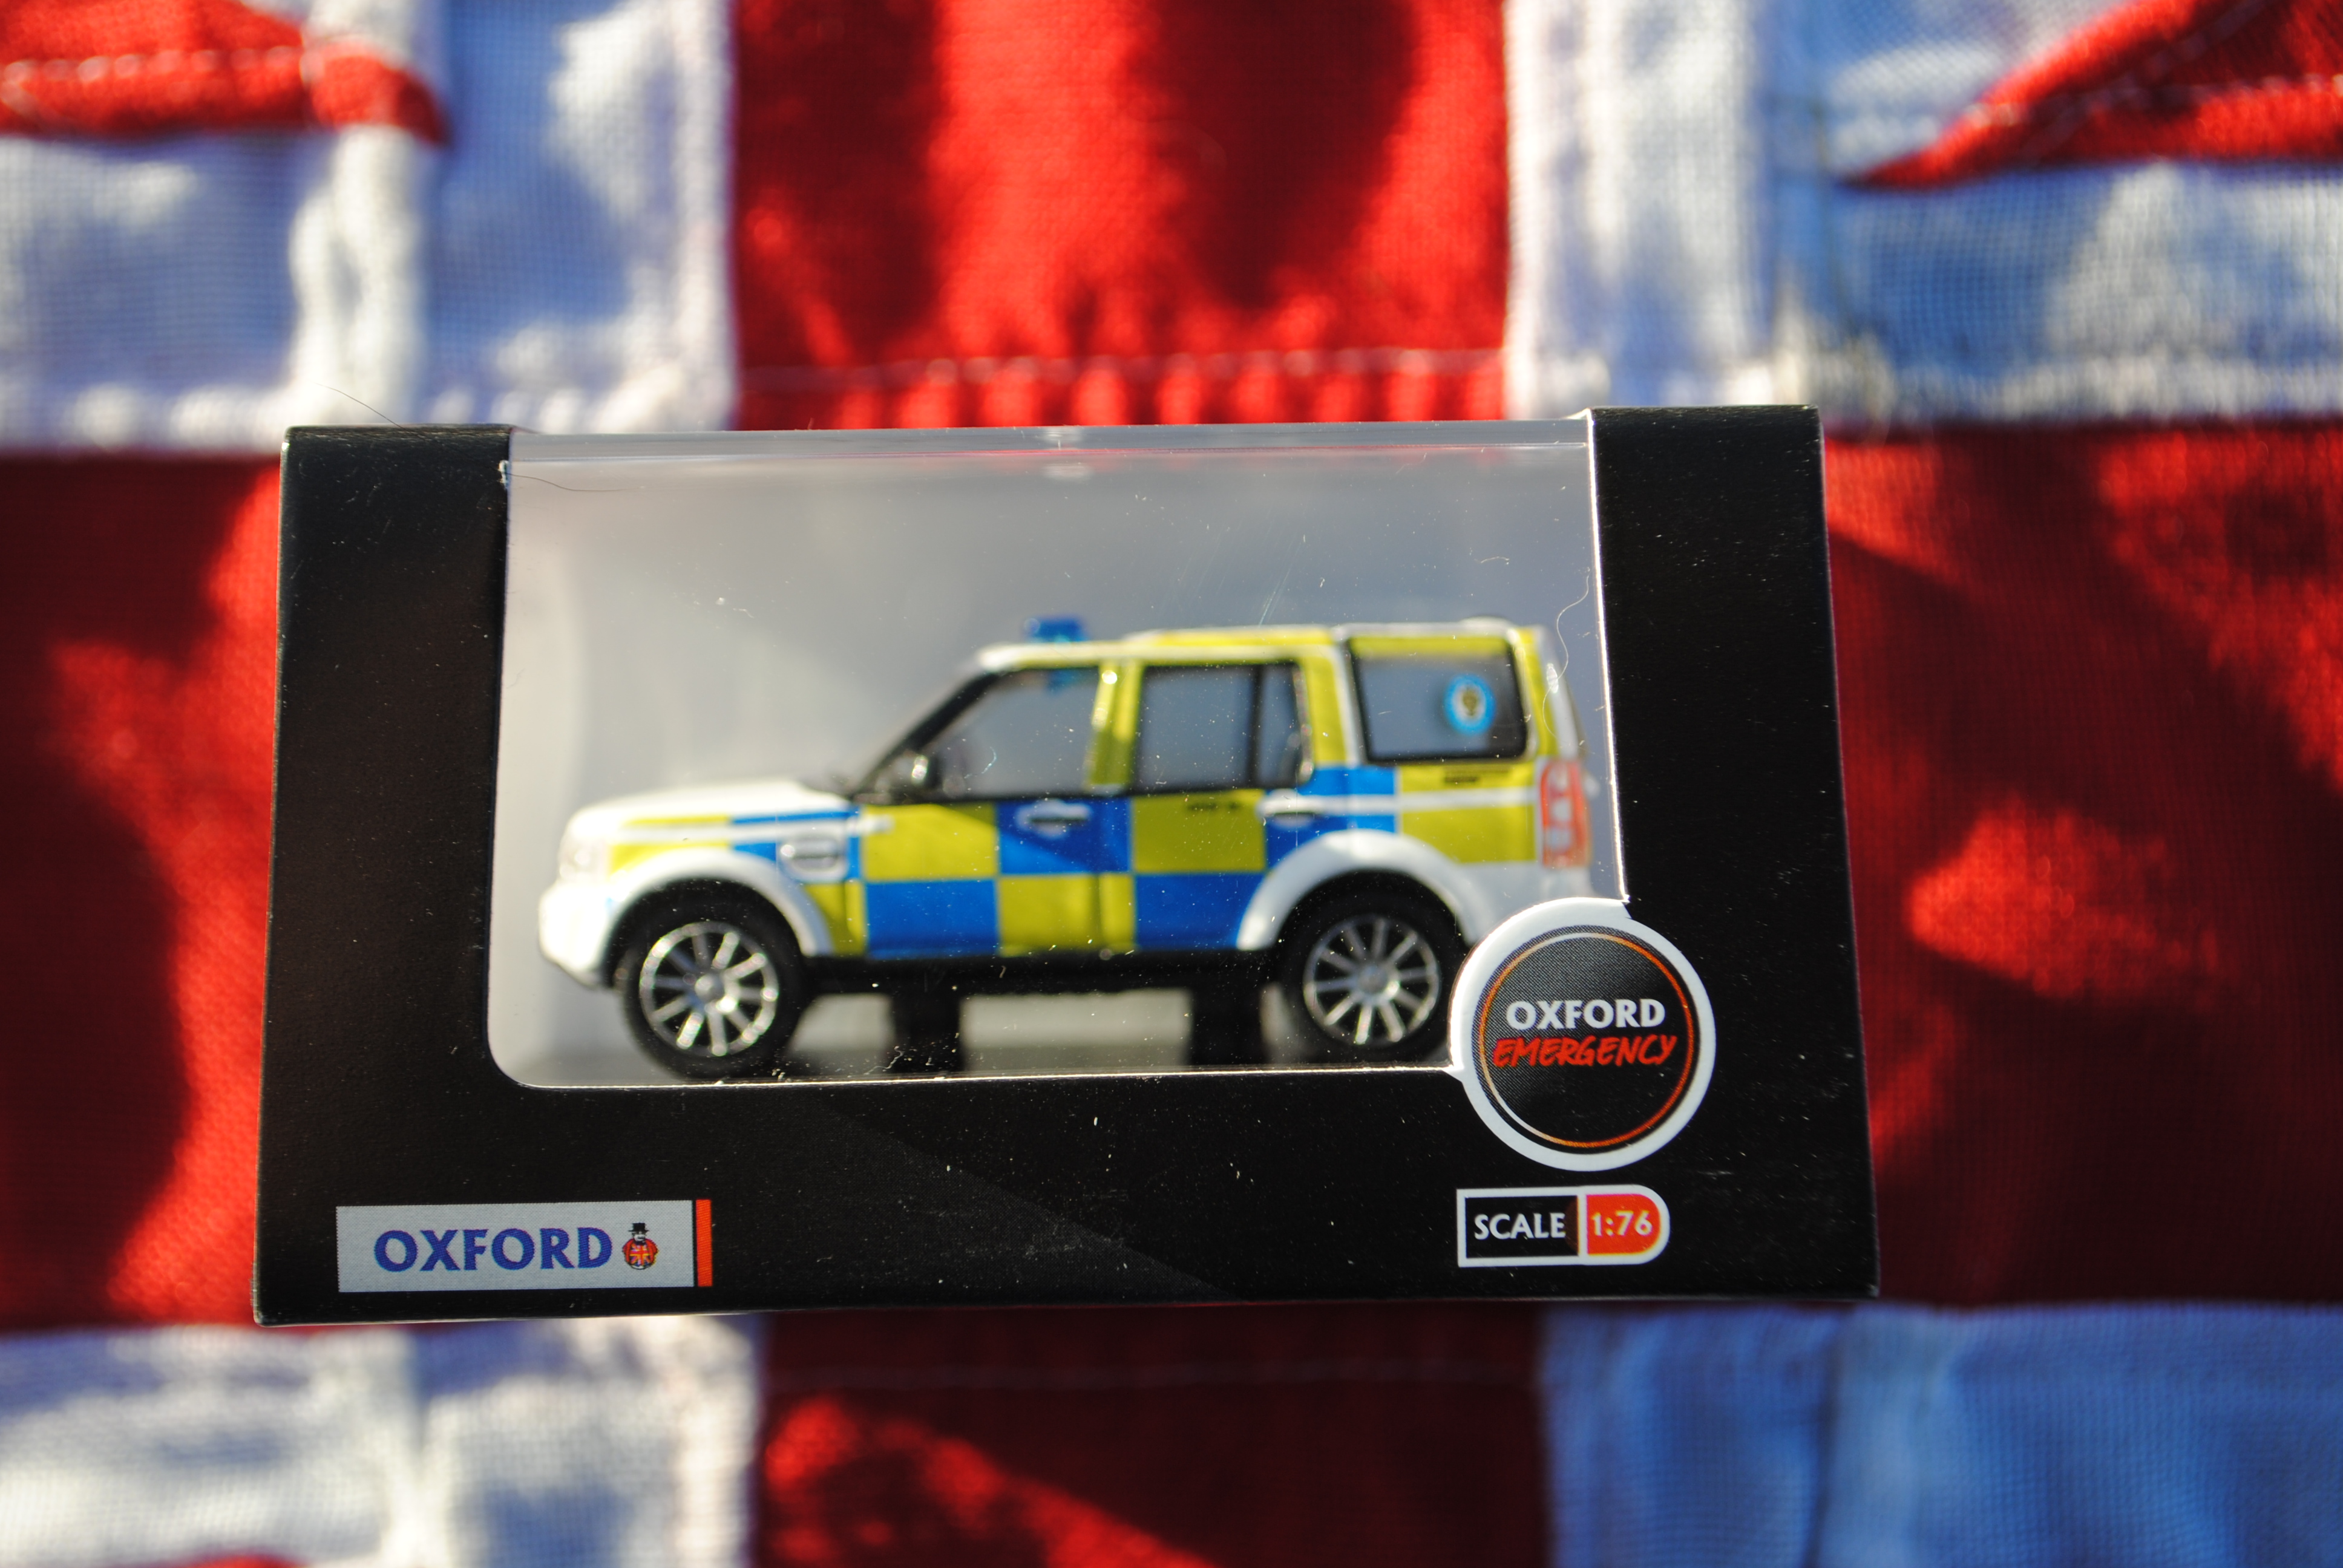 Oxford 76DIS006 Land Rover Discovery 4 West Midlands Police